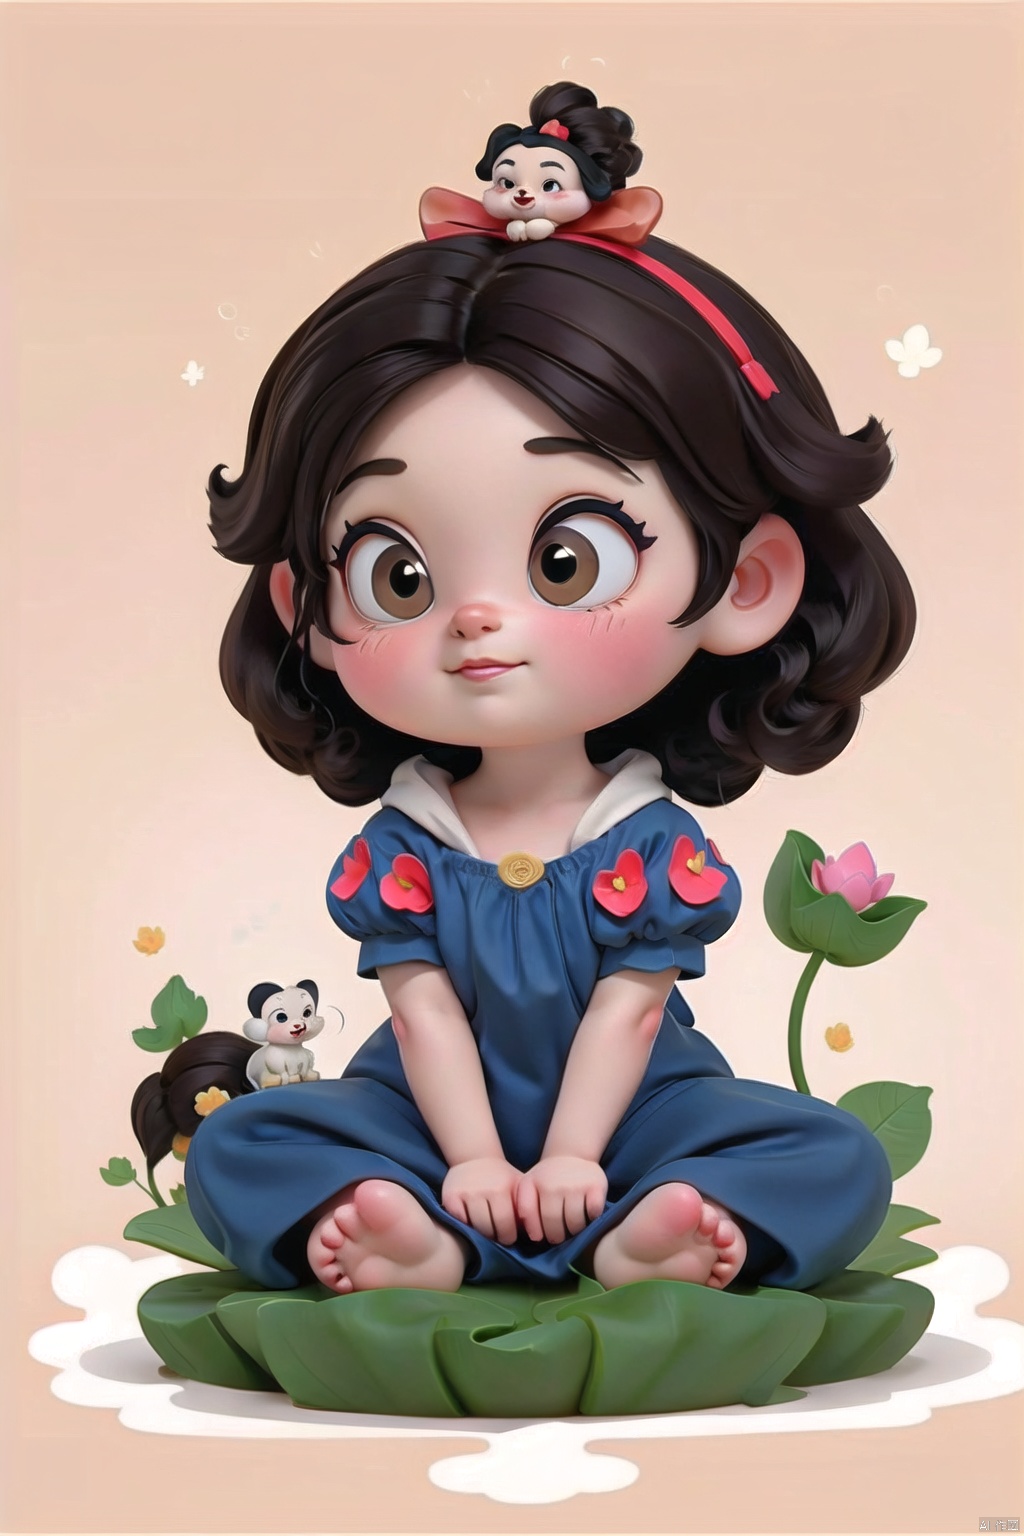 Light background, flat picture, cartoon avatar, super seated cute Snow White with a red bow hairpin on her head, sitting on a lotus flower, good luck lotus wish, minimalist thick lines, stick figures, lines puppy style